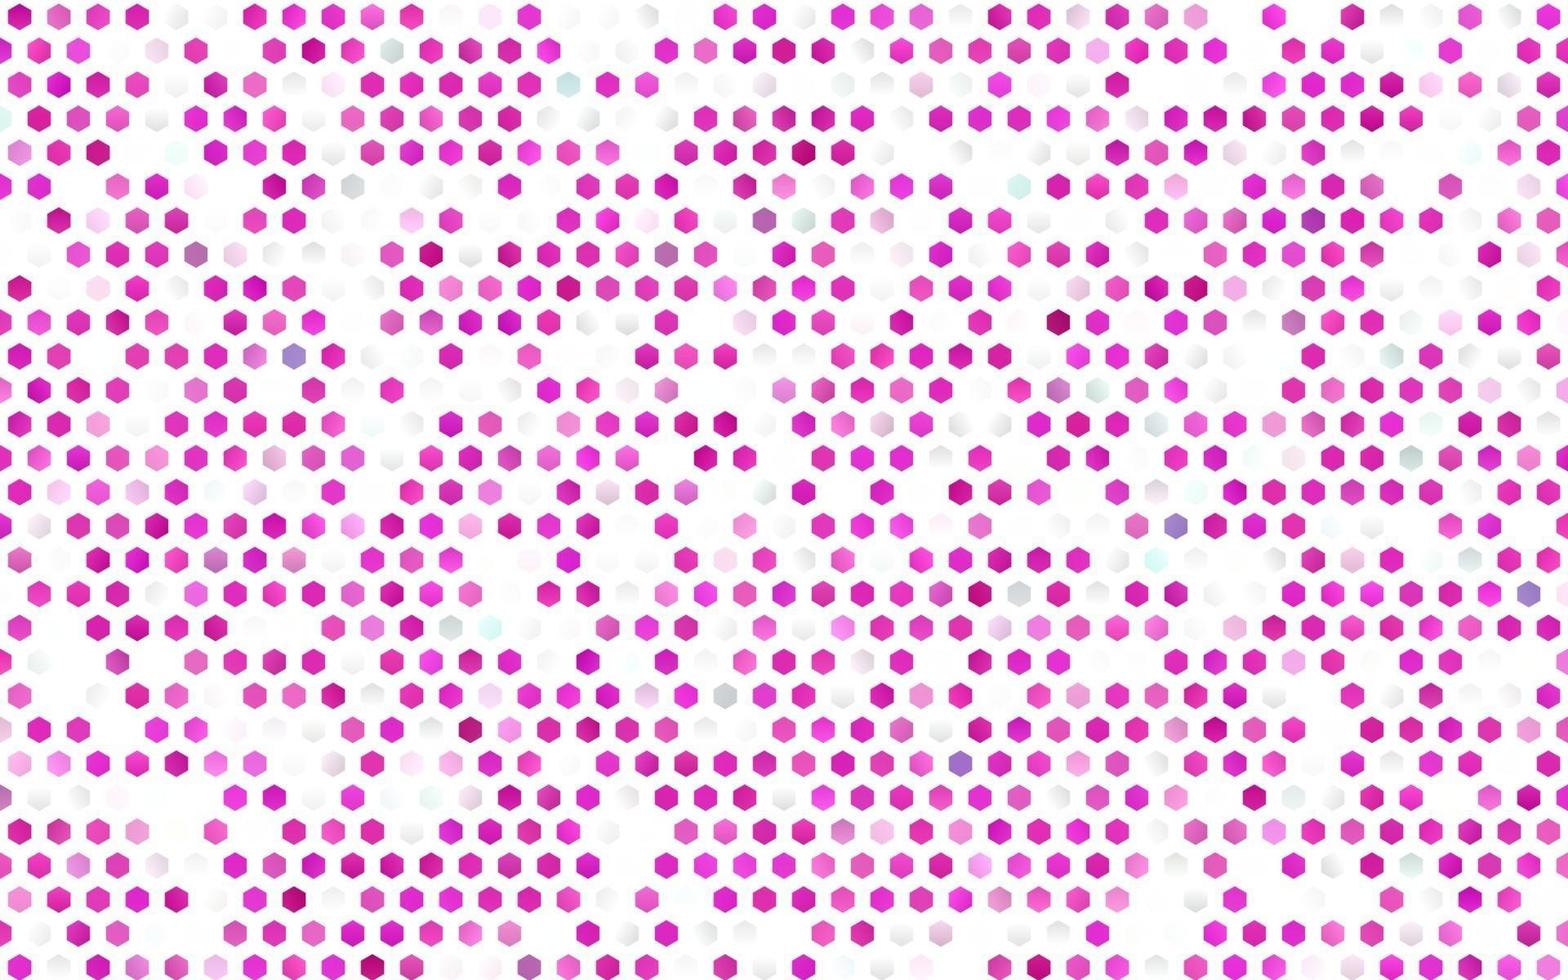 Light Pink vector layout with hexagonal shapes.